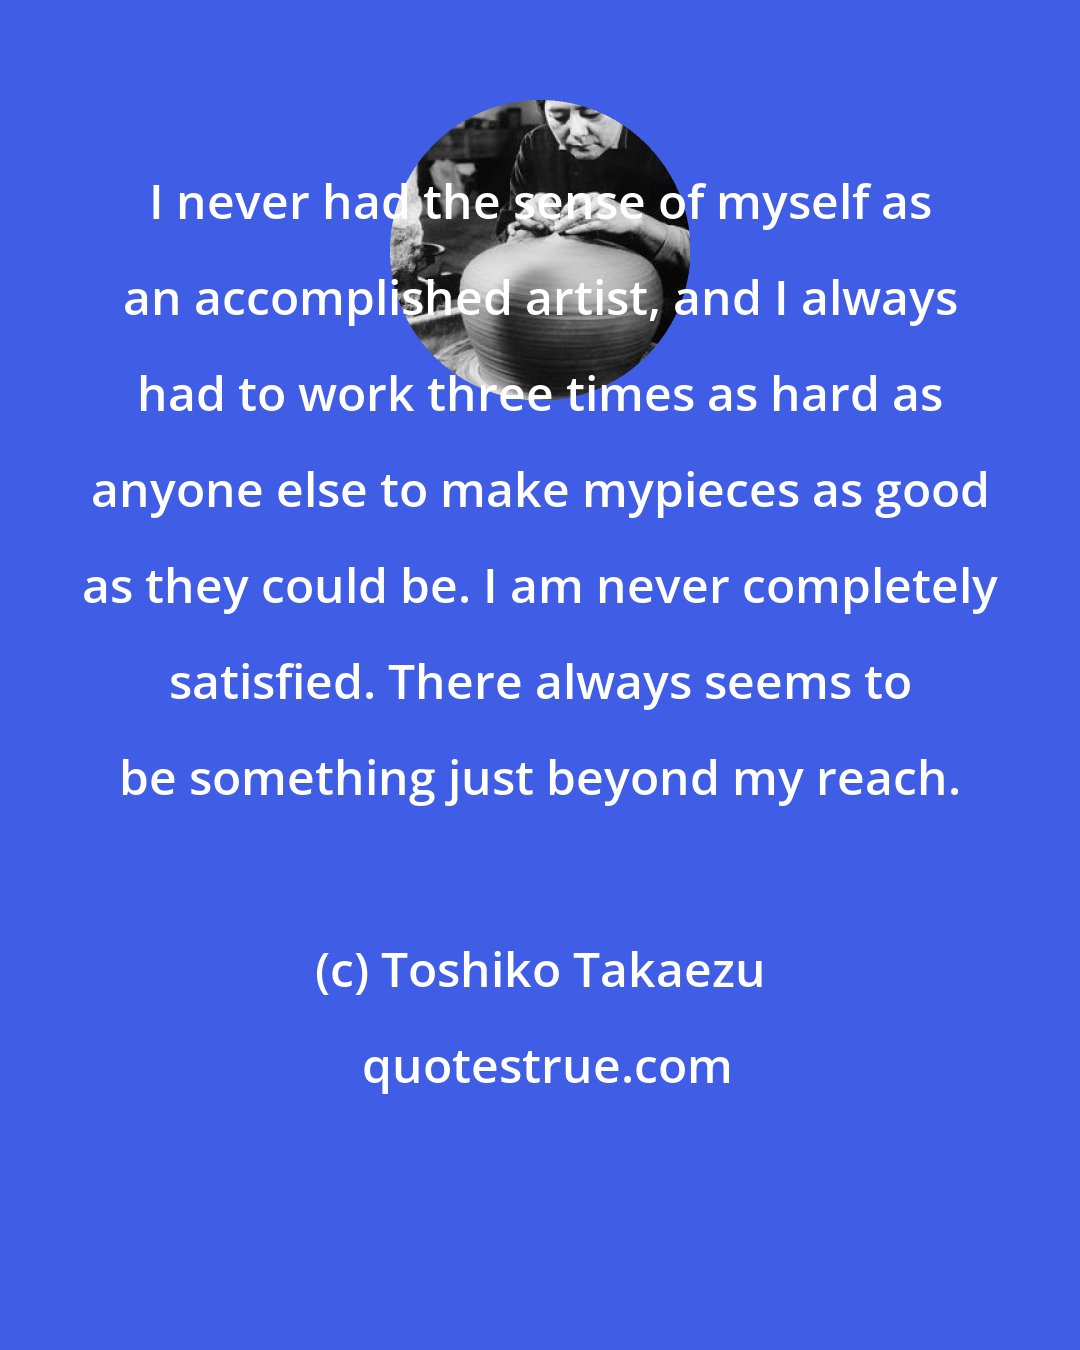 Toshiko Takaezu: I never had the sense of myself as an accomplished artist, and I always had to work three times as hard as anyone else to make mypieces as good as they could be. I am never completely satisfied. There always seems to be something just beyond my reach.